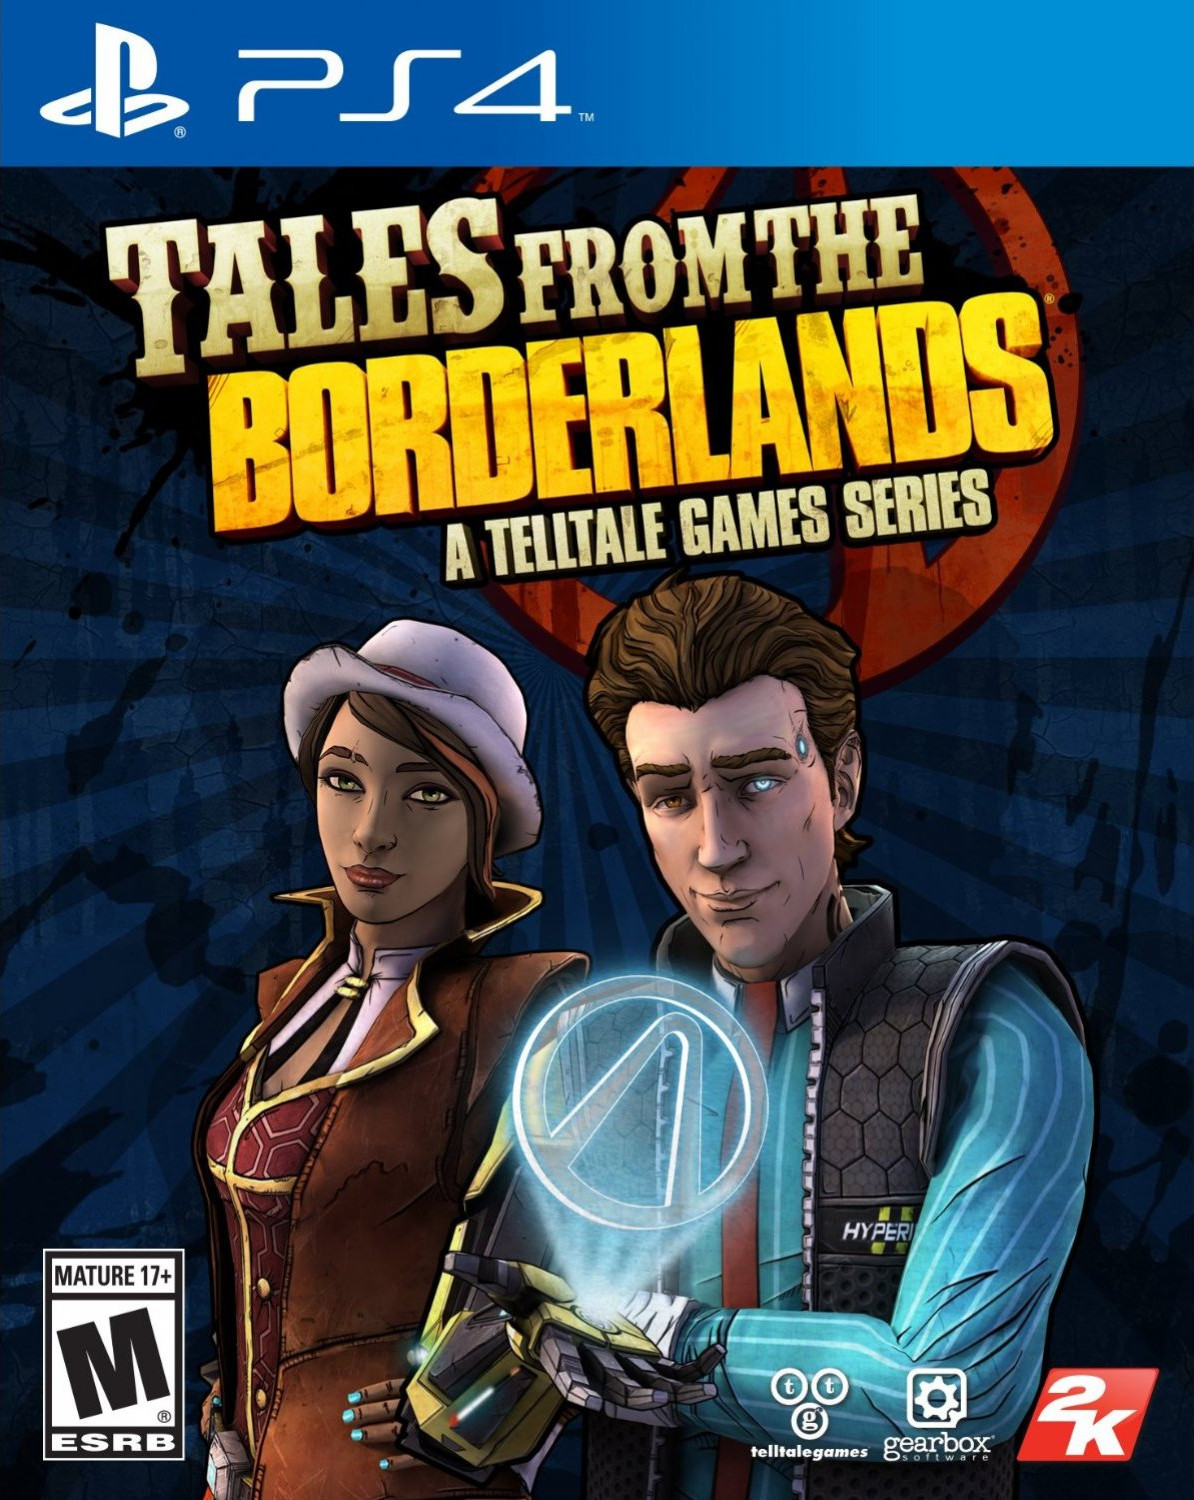 download free the new tales from the borderlands